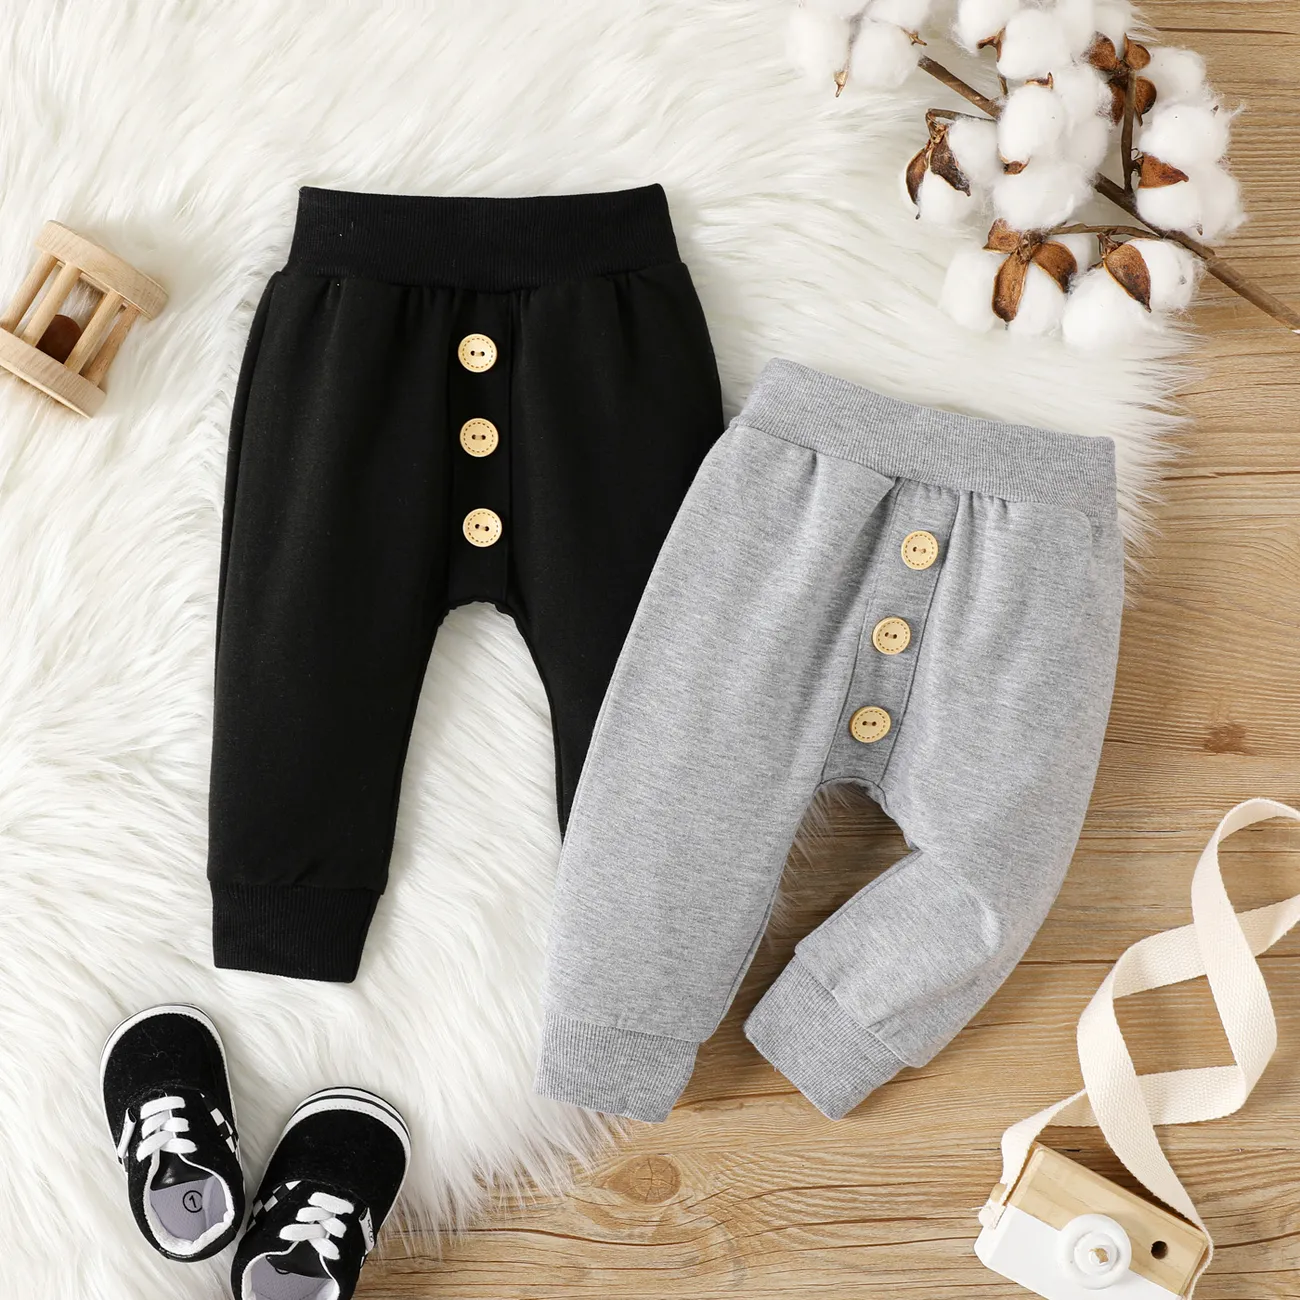 Baby Boy/Girl Button Front Solid Sweatpants Black big image 1